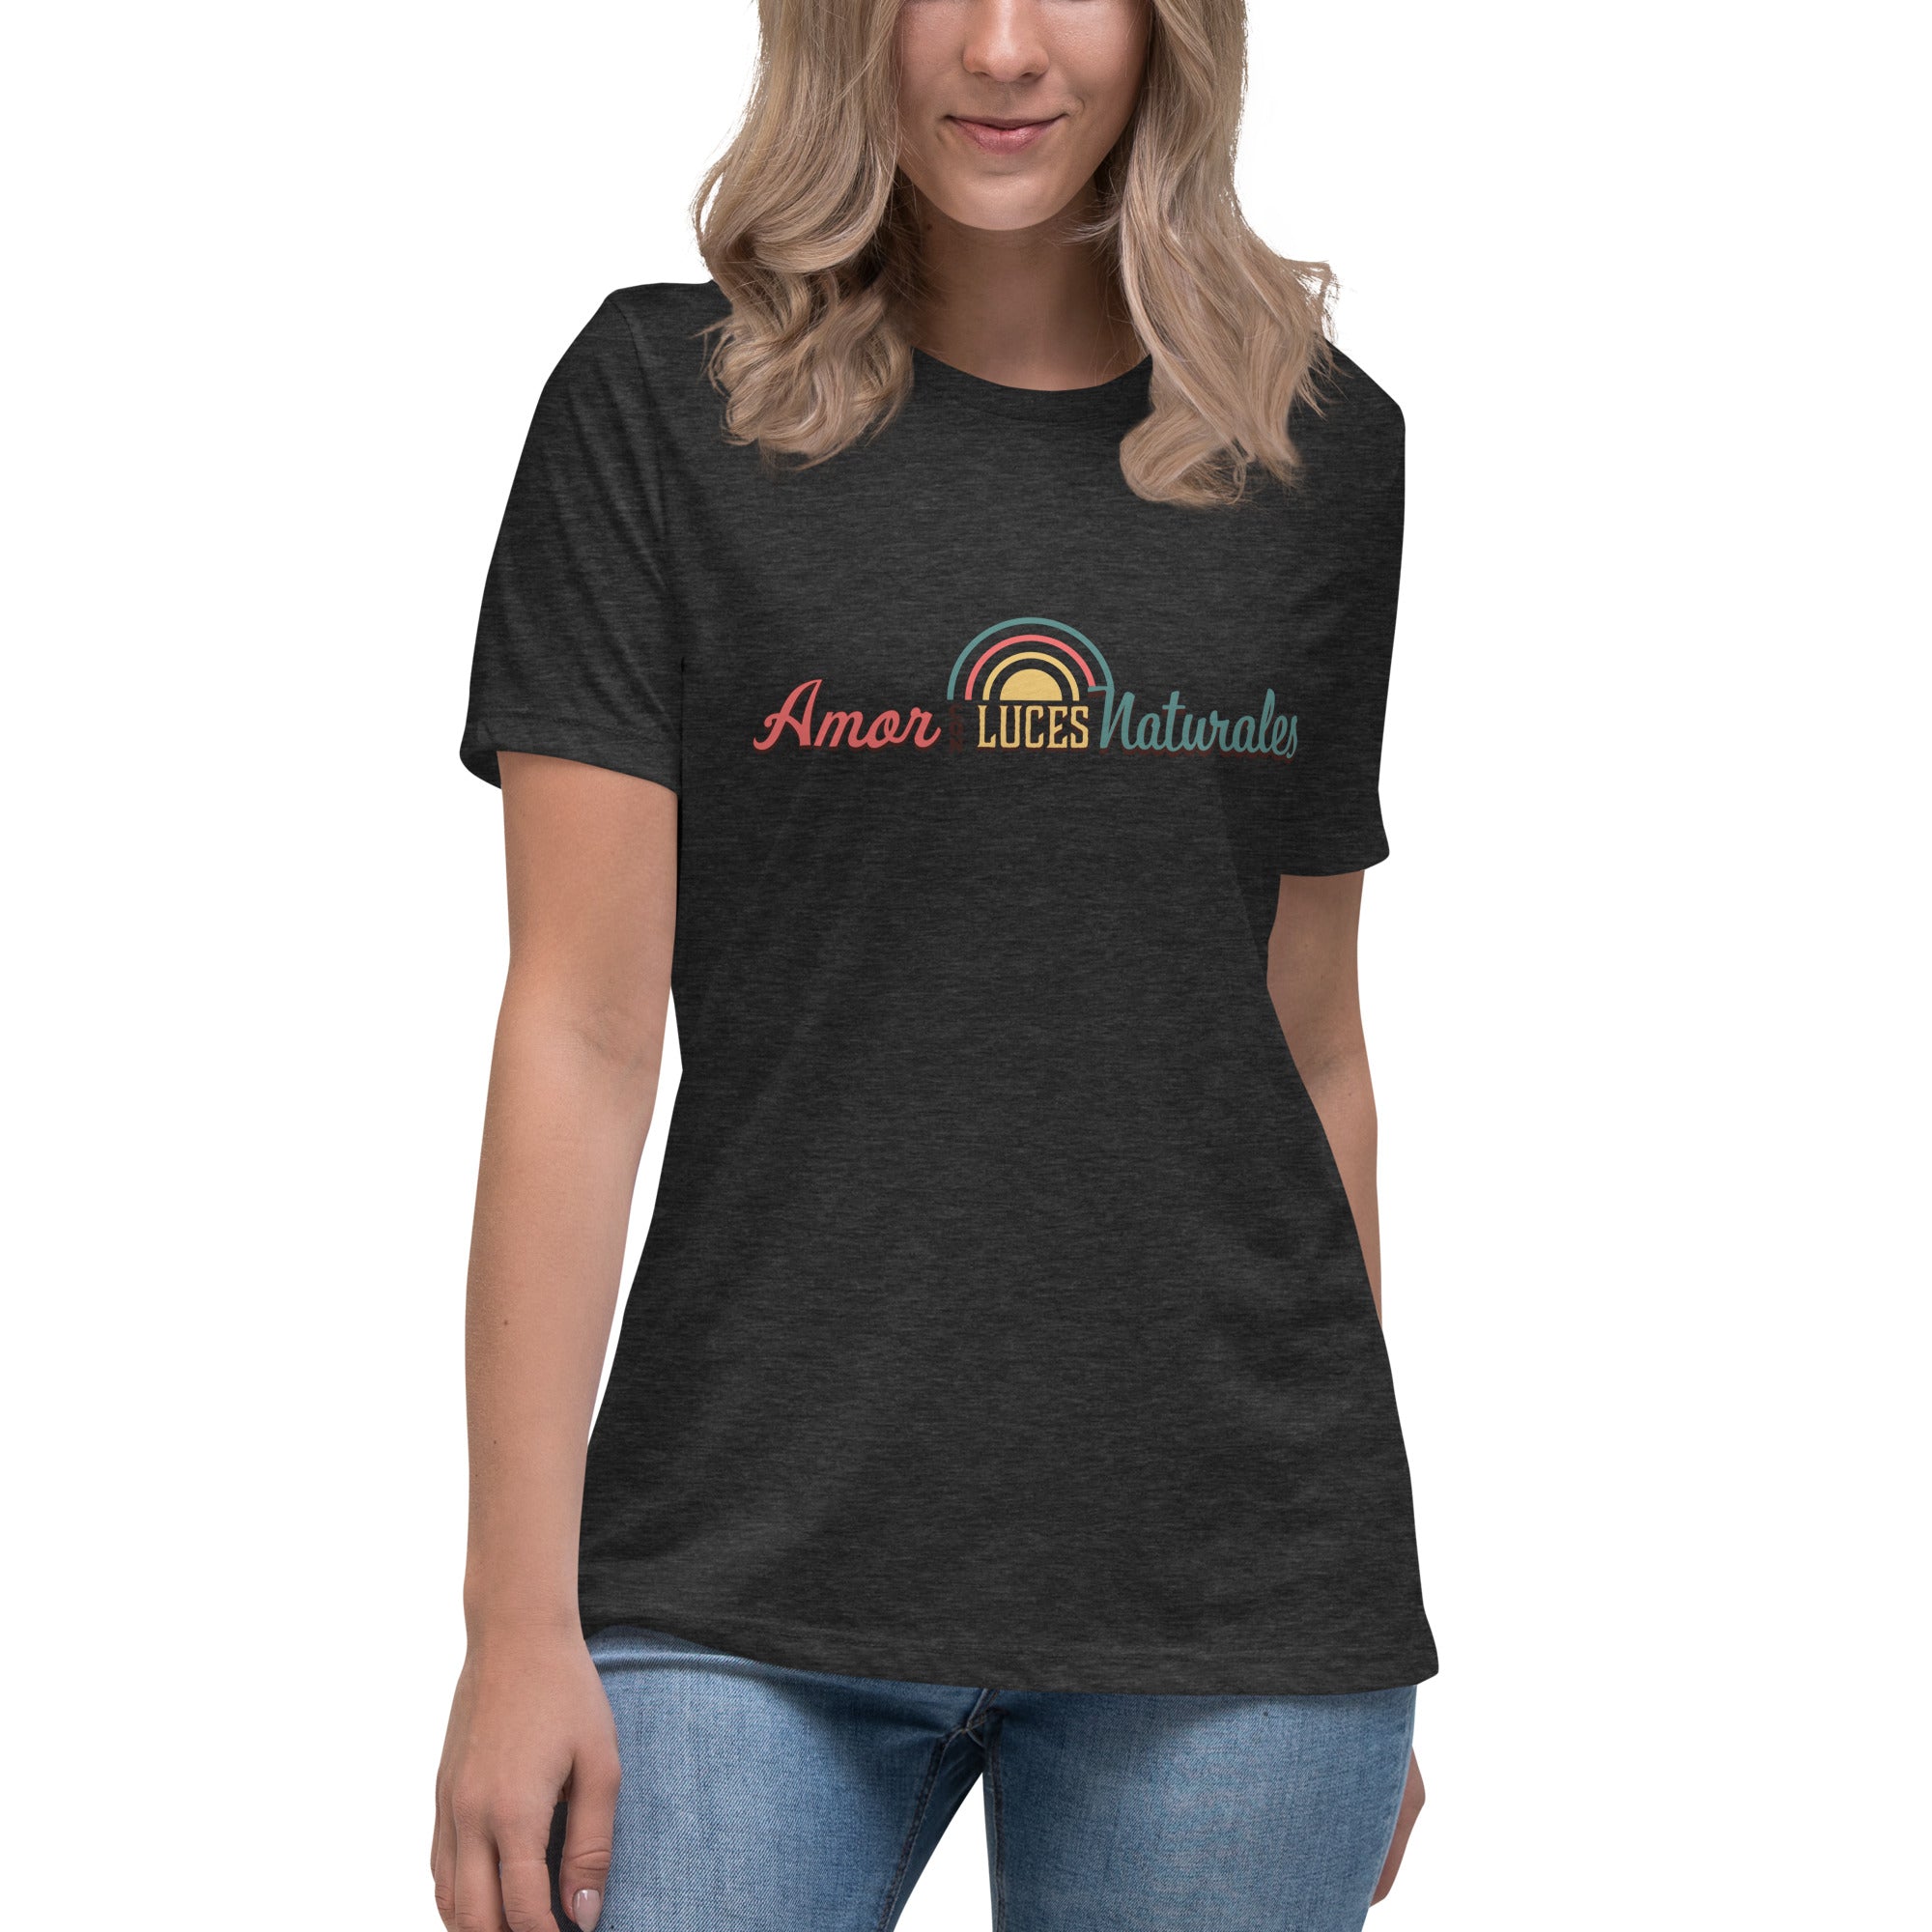 Relaxed Women's T-shirt, Amor con Luces Naturales - LOS GUSANOS